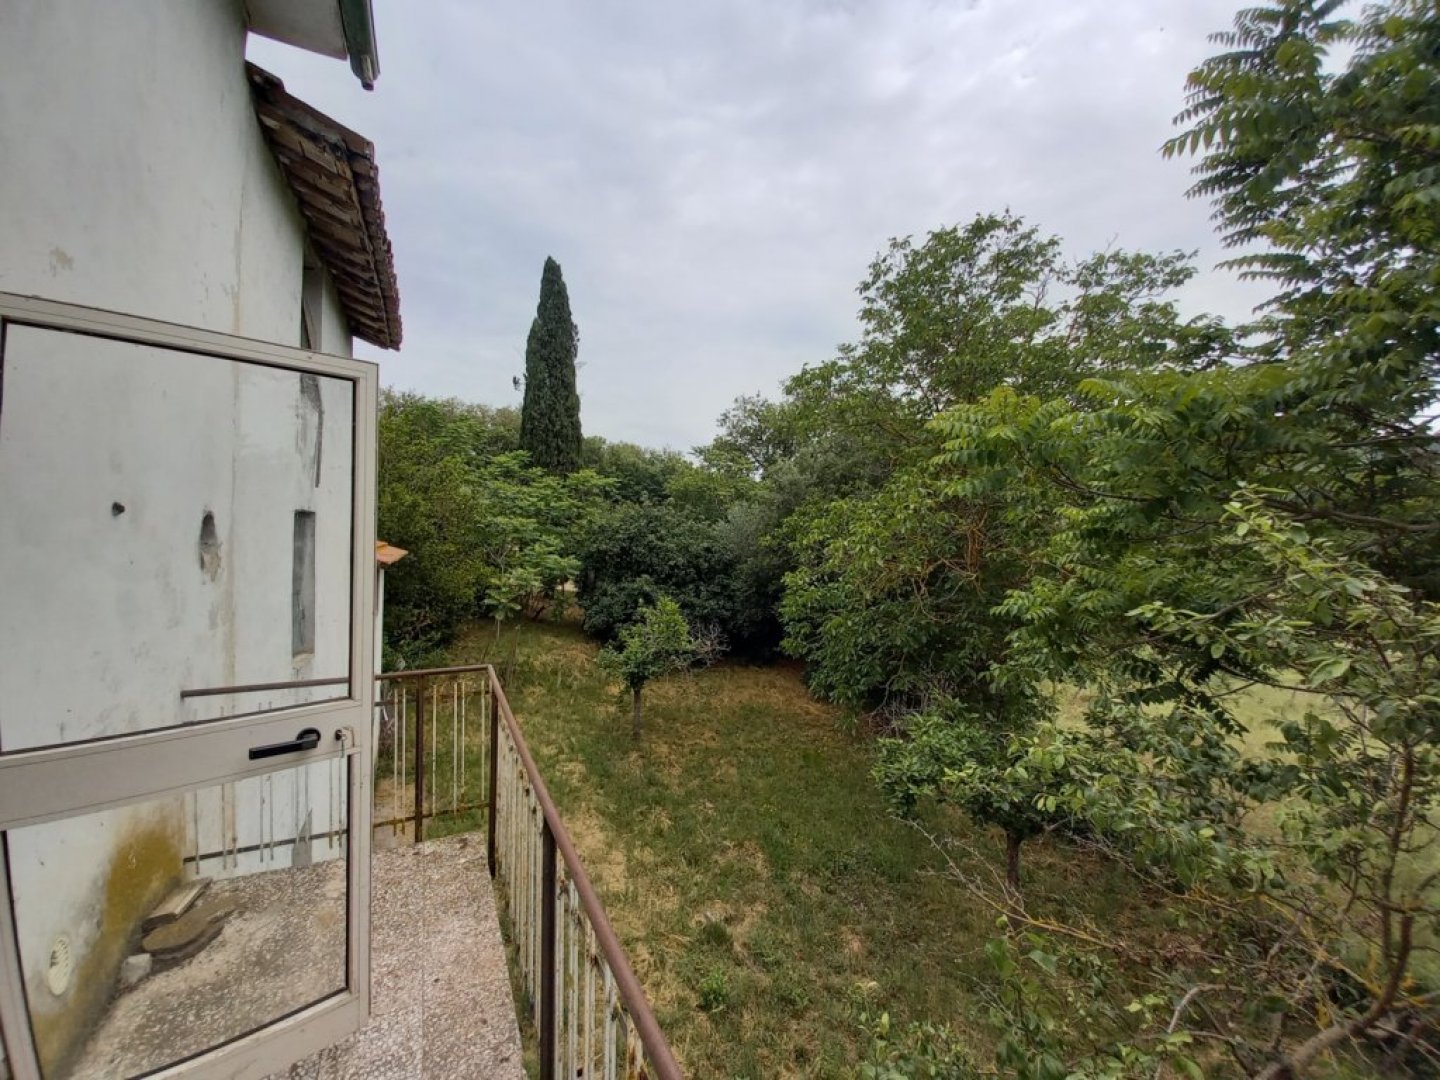 Detached house in the open countrysideg_20220617081555 ium36909-g_20220617081555.